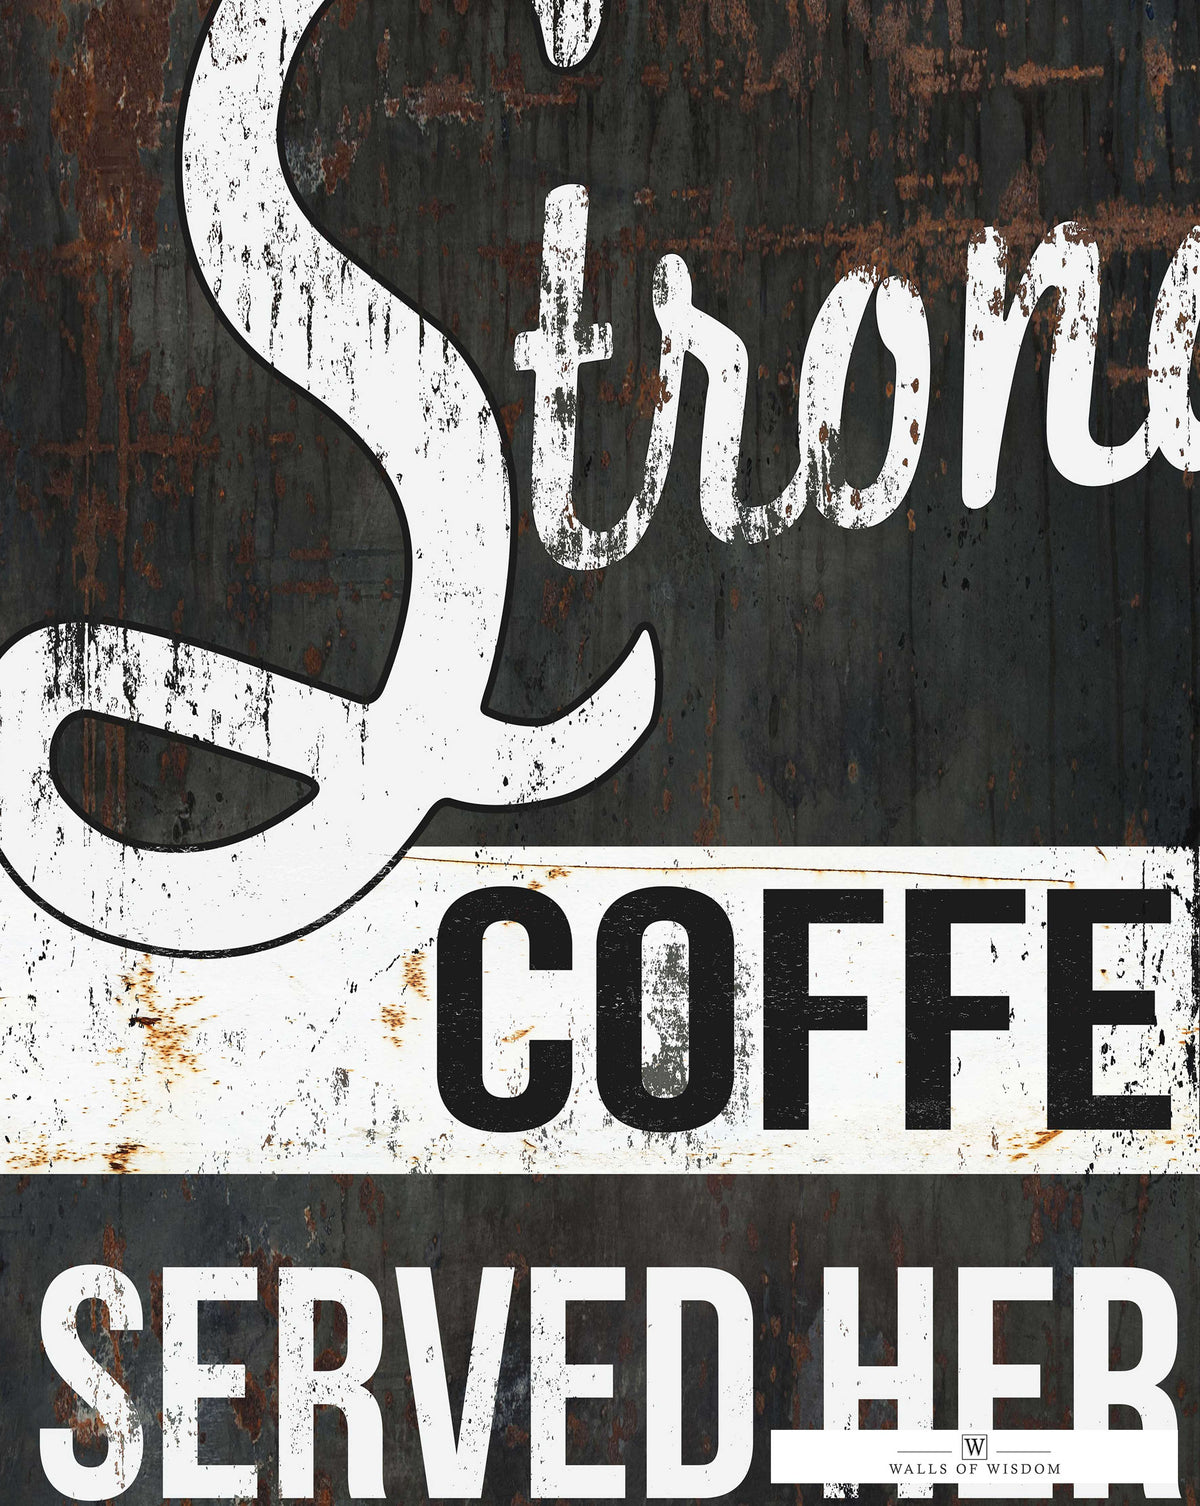 Vintage Style Coffee Bar Sign - Strong Coffee Served Daily Canvas Wall Art